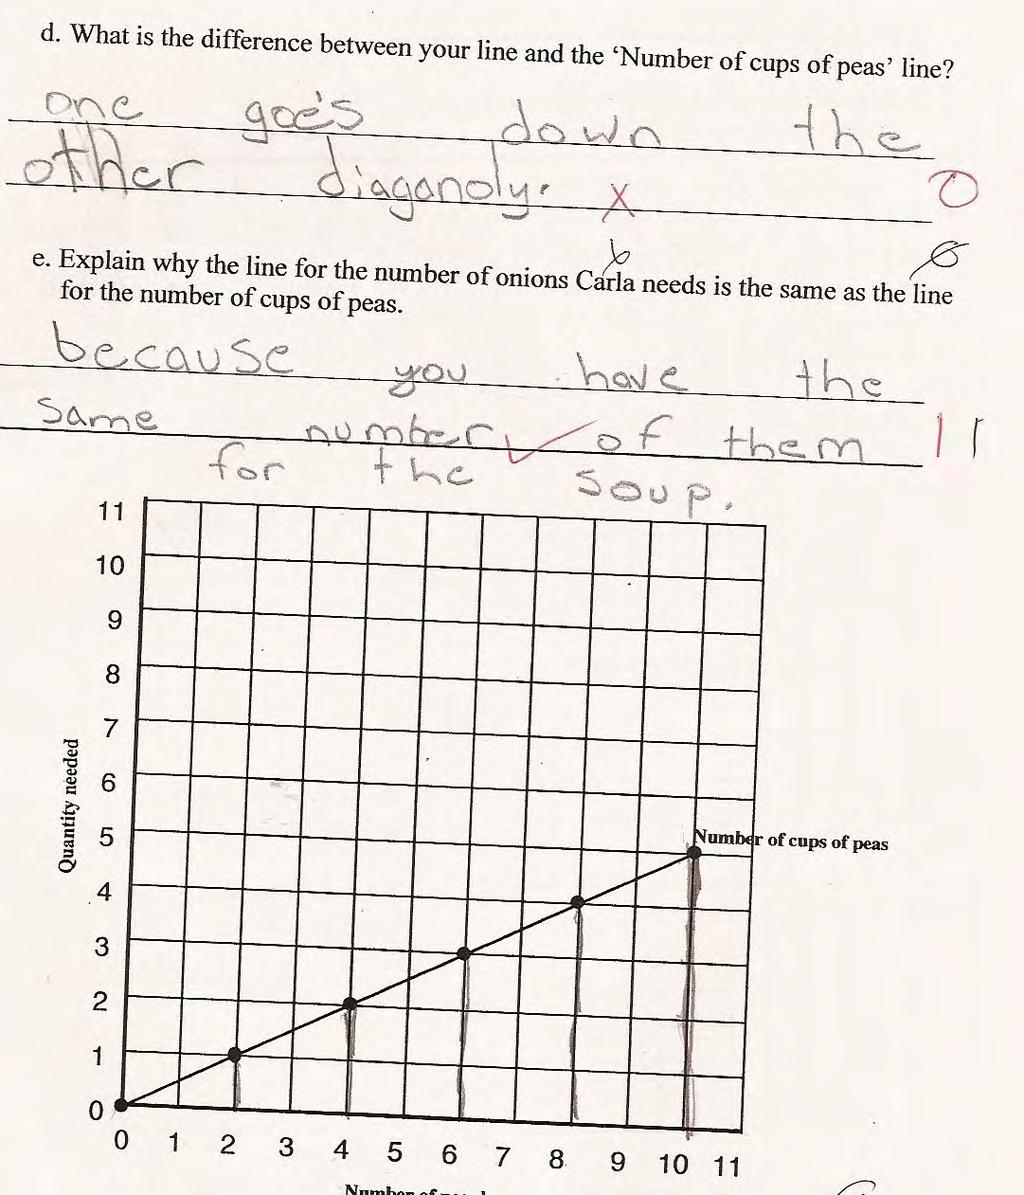 Student F also has difficulty with graphing.